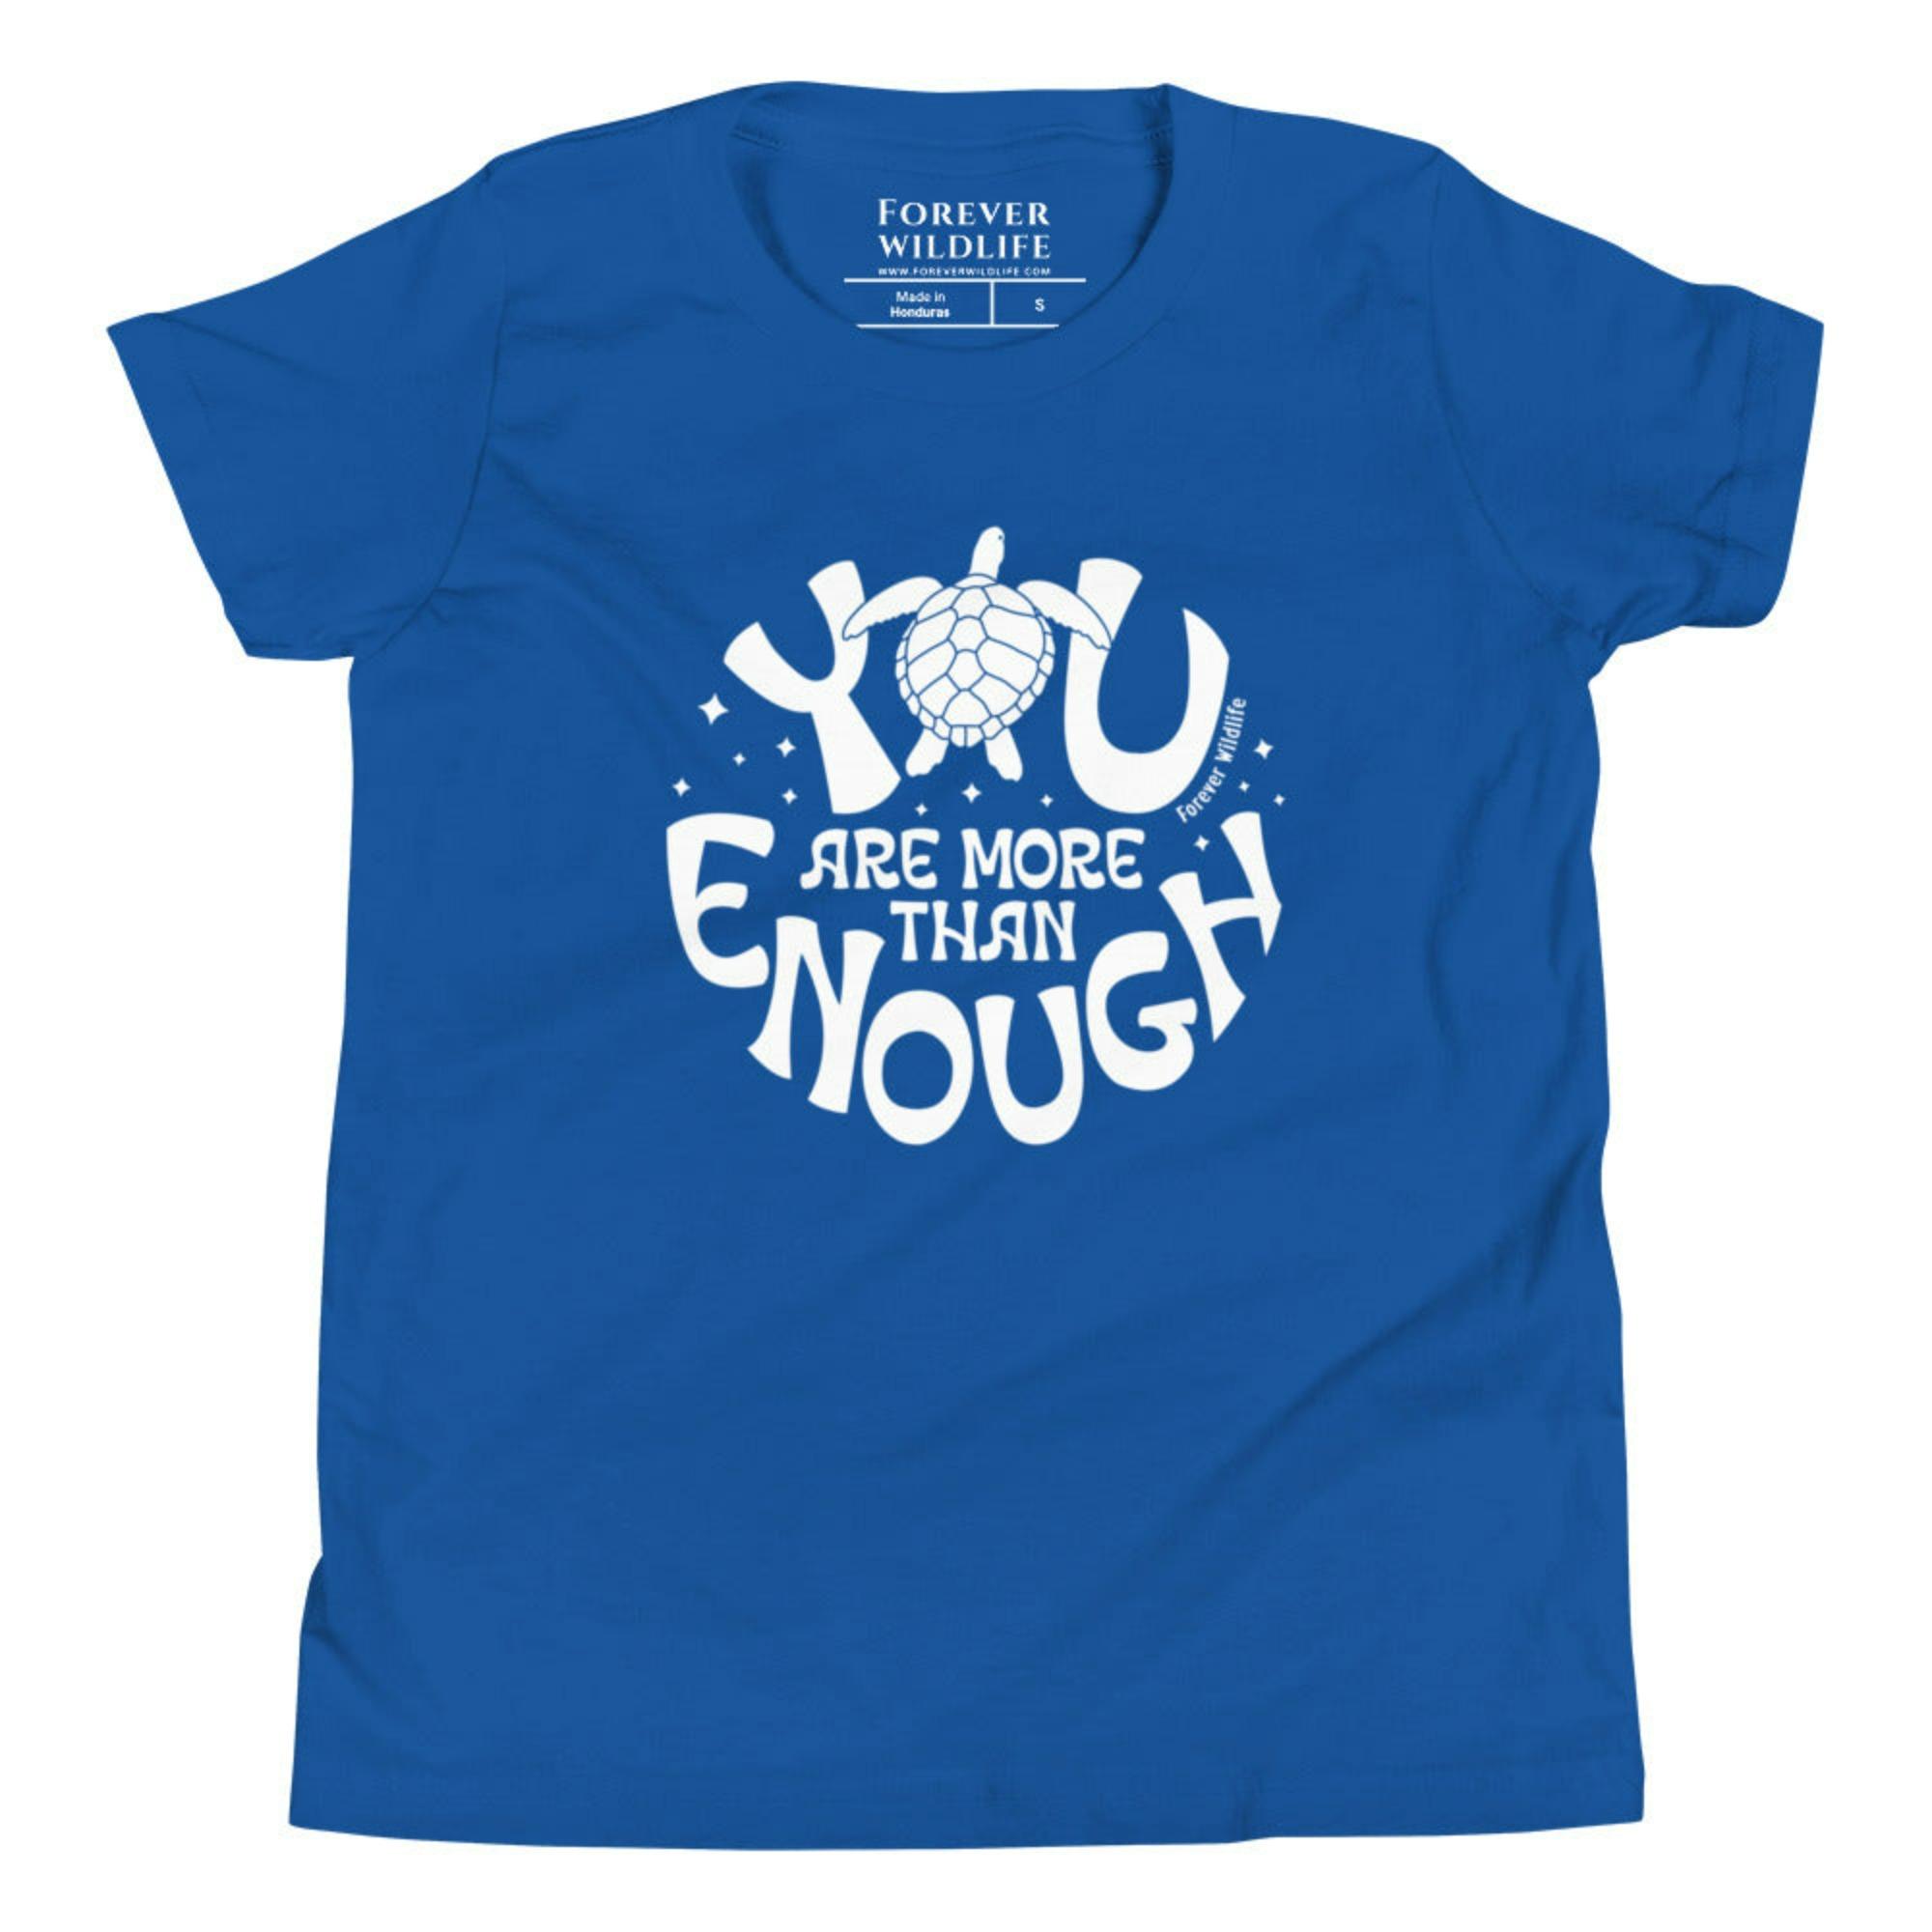 True Royal Youth T-Shirt with Sea Turtle graphic as part of Wildlife T-Shirts, Wildlife Clothing & Apparel by Forever Wildlife